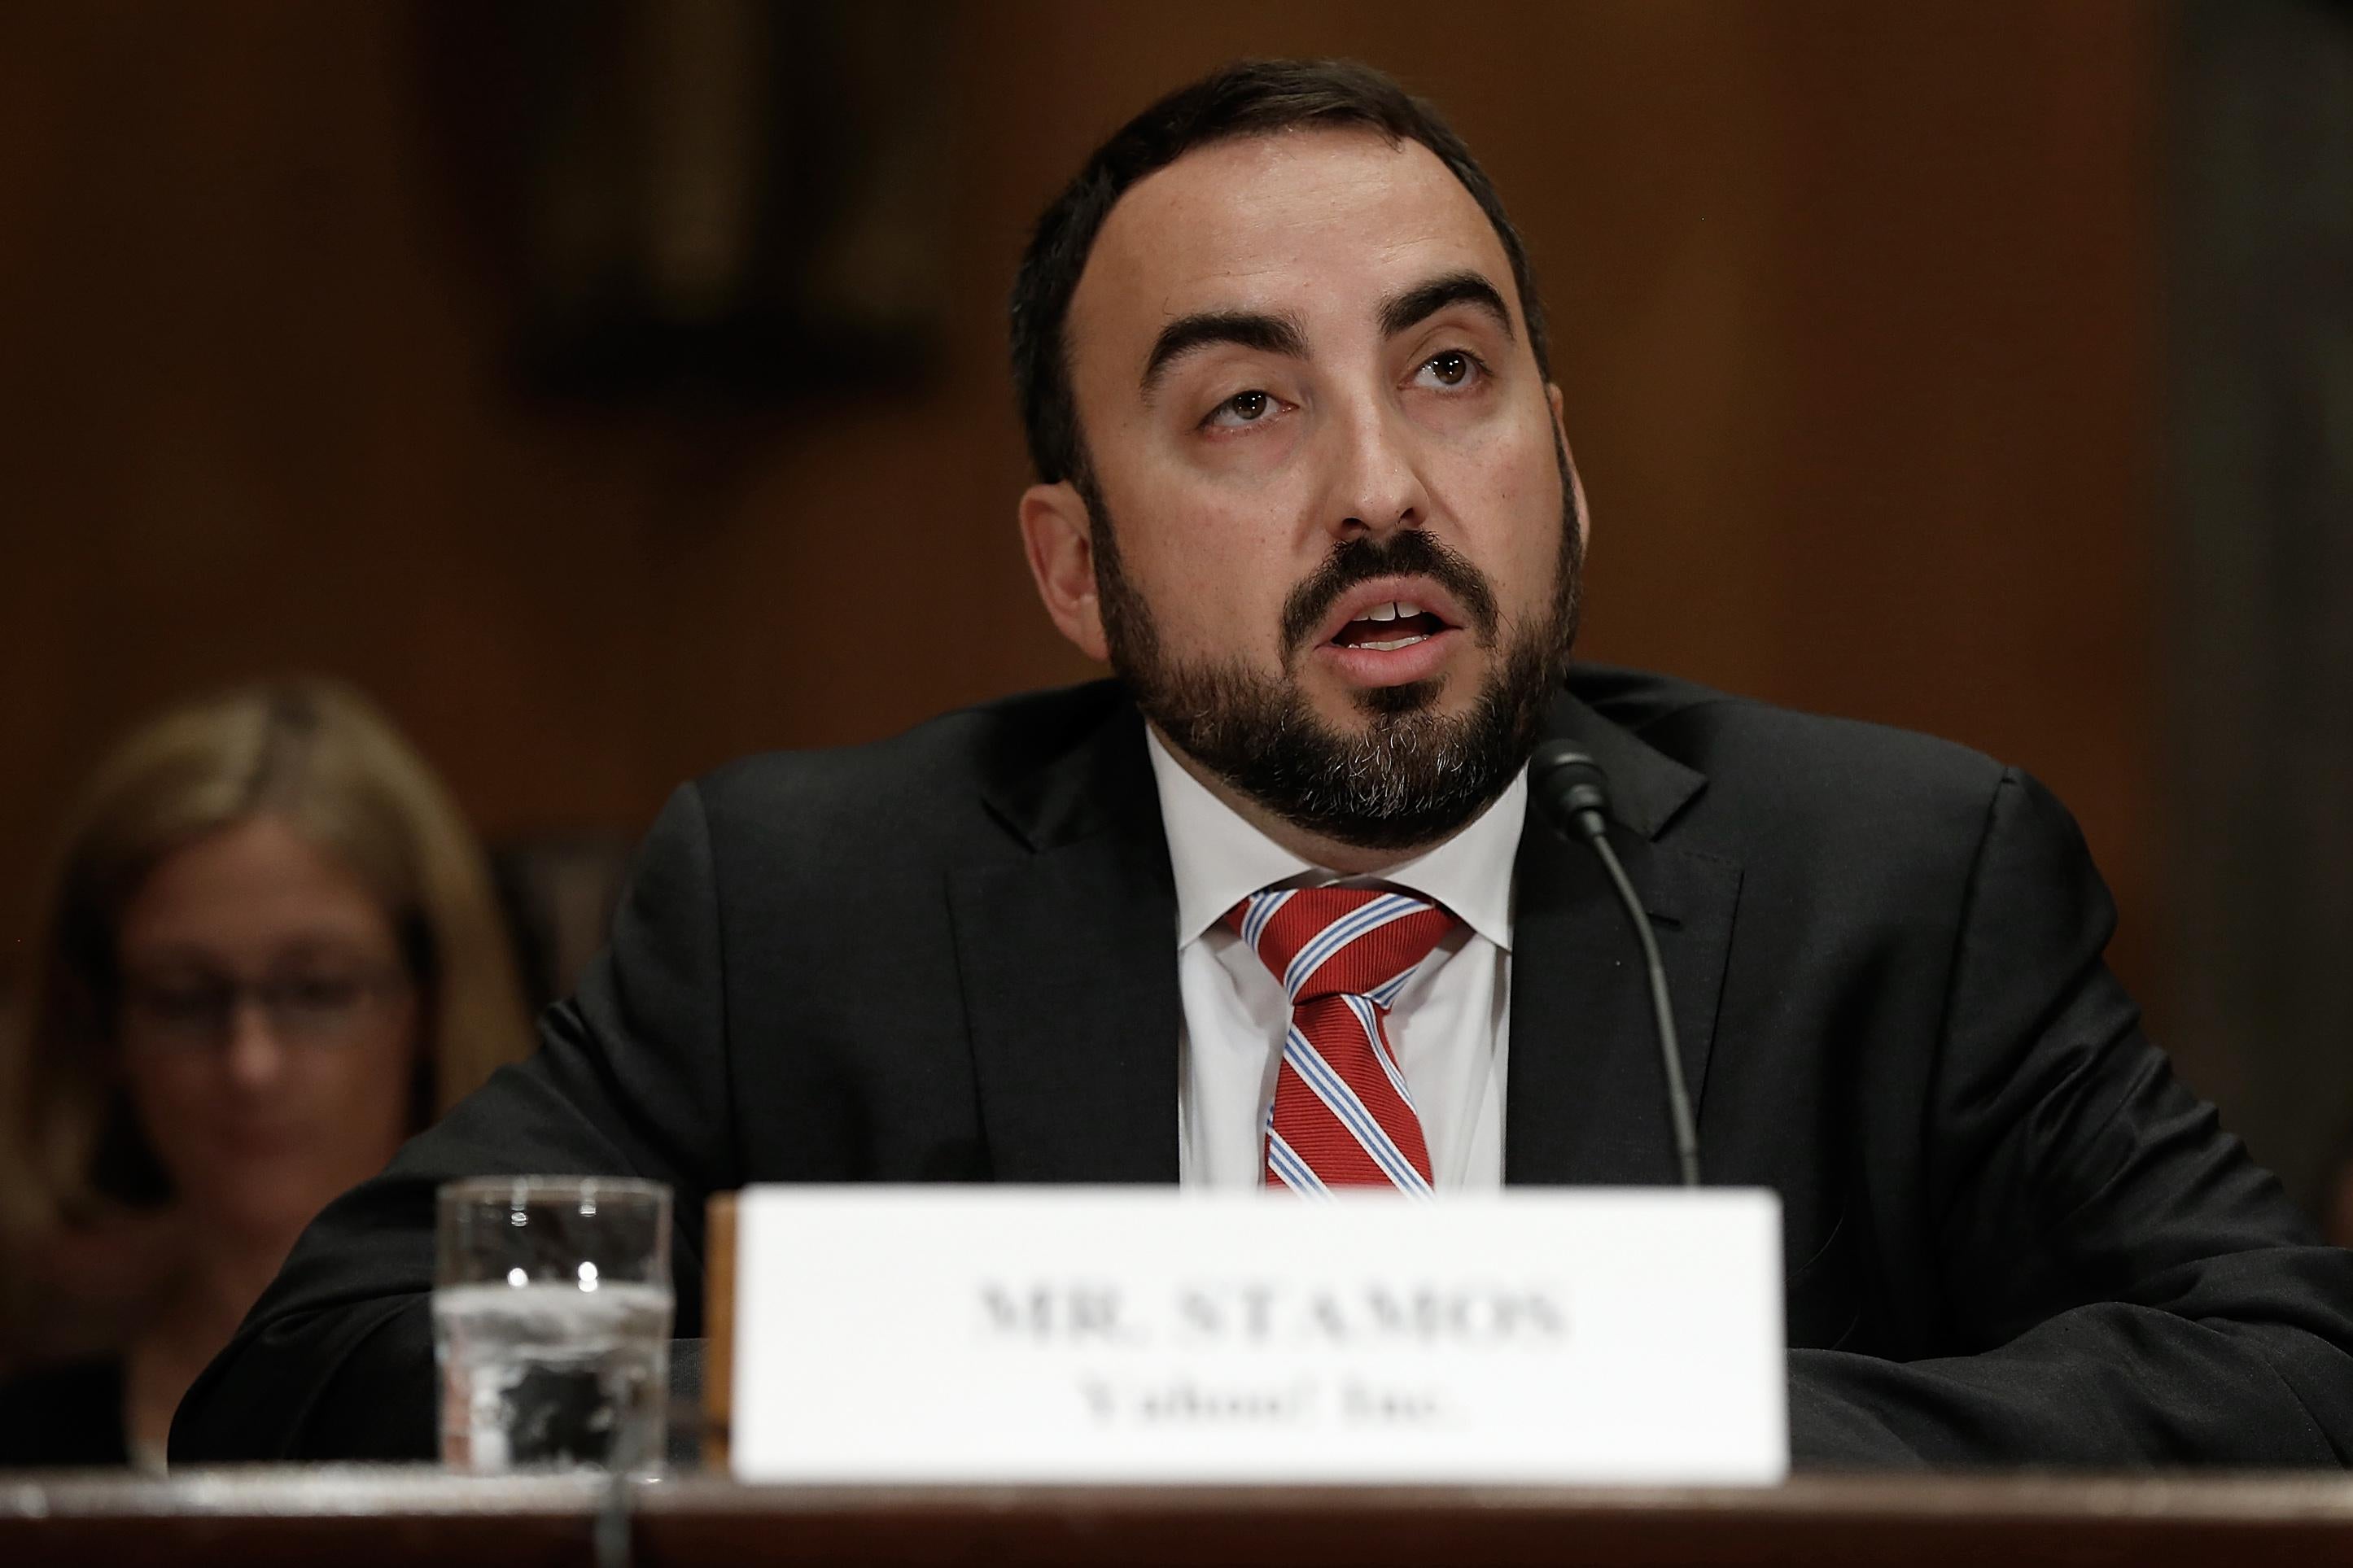 Facebook's chief security officer, Alex Stamos—shown here testifying before the Senate in 2014 in his previous role at Yahoo—is spearheading the company's effort to crack down on fake news, propaganda, and Russian election interference.